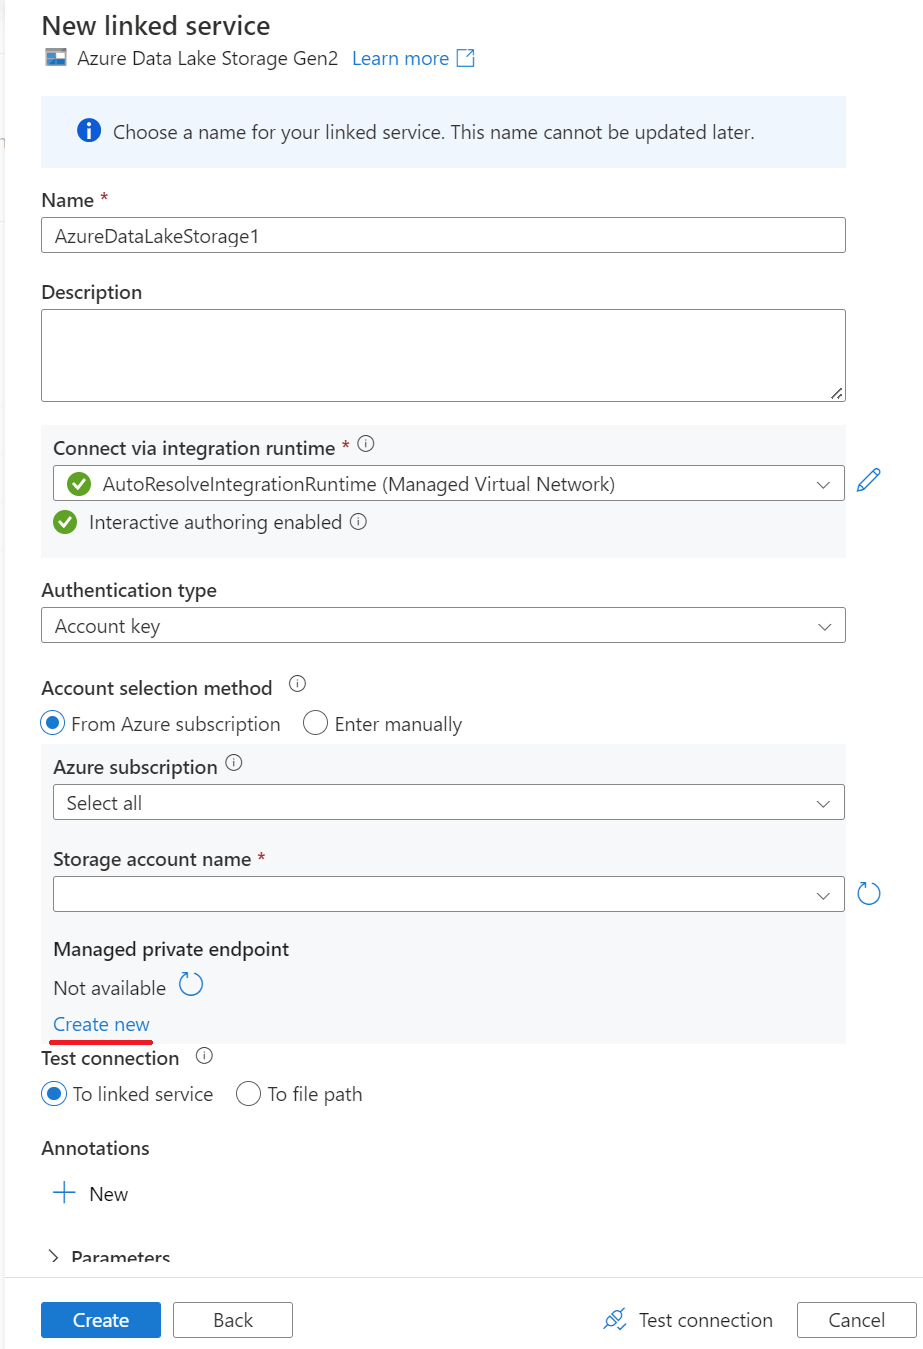 Screenshot of a new Azure SQL Server 2022 database linked service private endpoint 1.